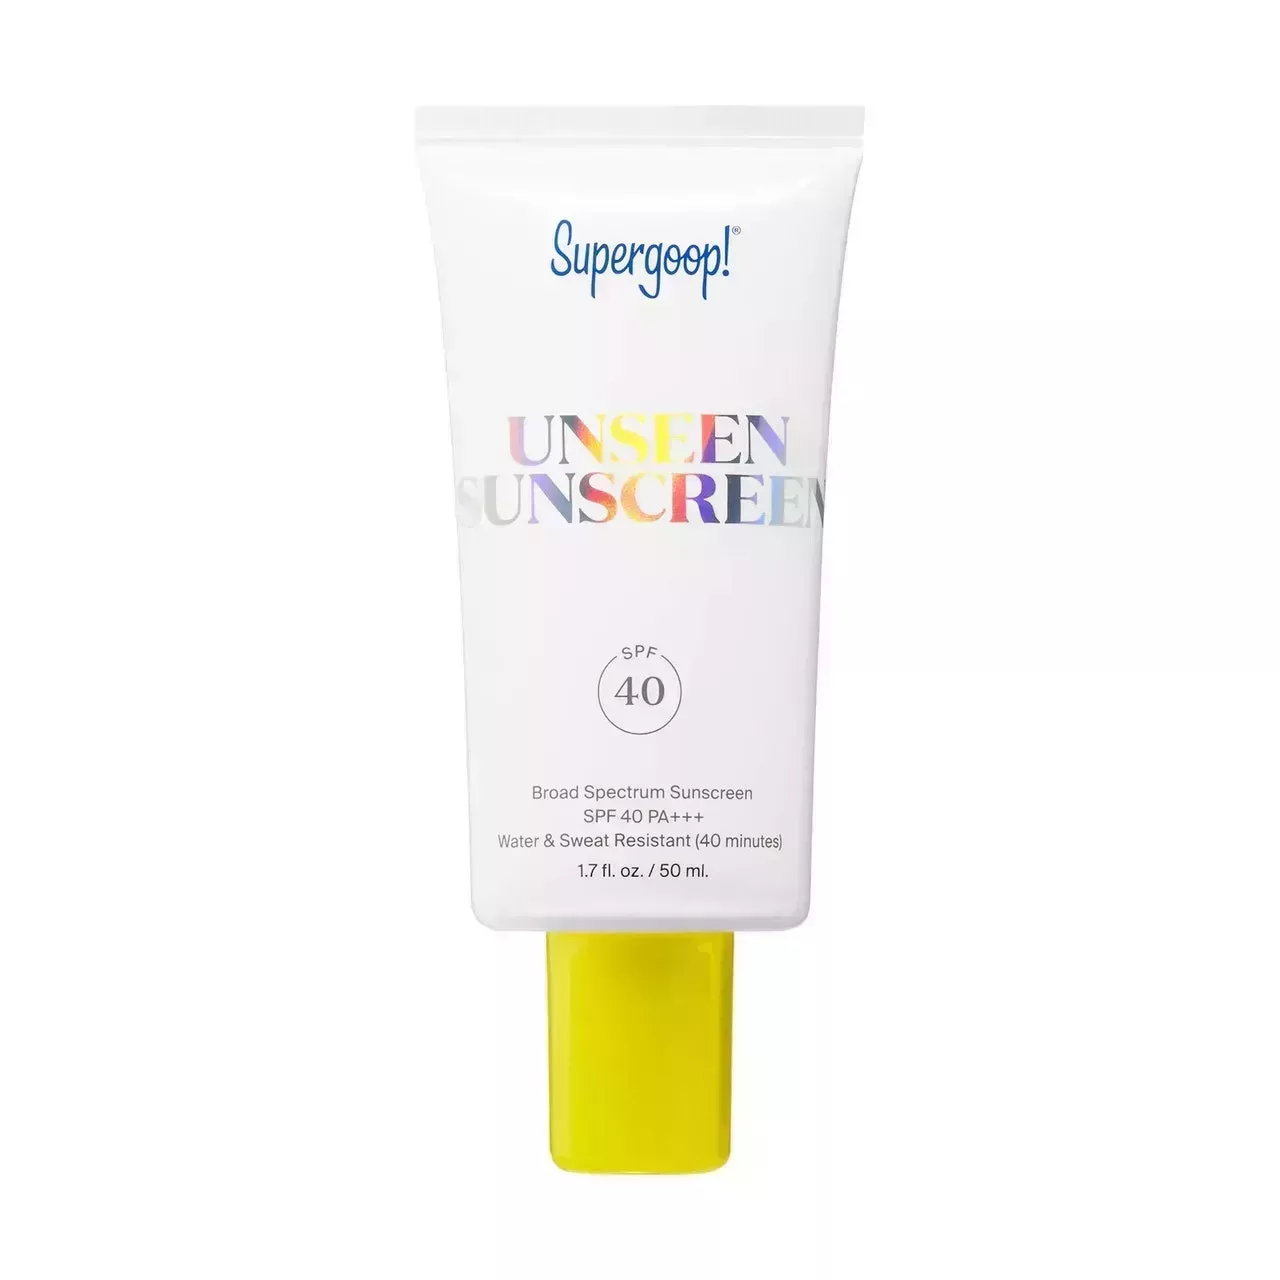 Supergoop Unseen Sunscreen on white background